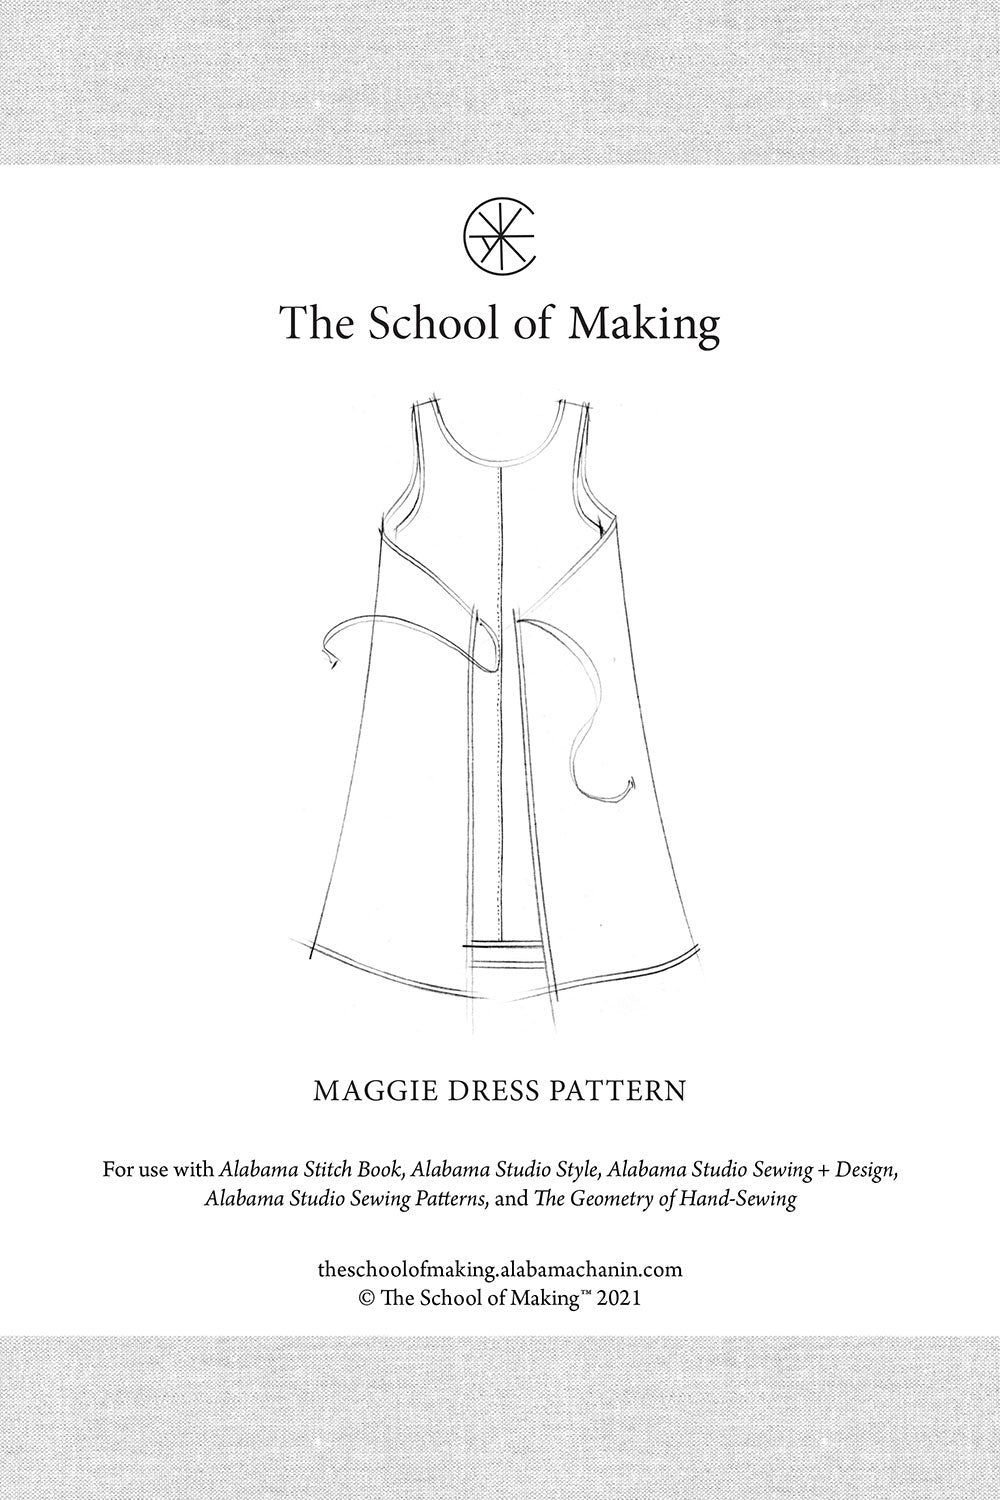 The School of Making The Maggie Dress Pattern Sewing Pattern for DIY Custom Clothing